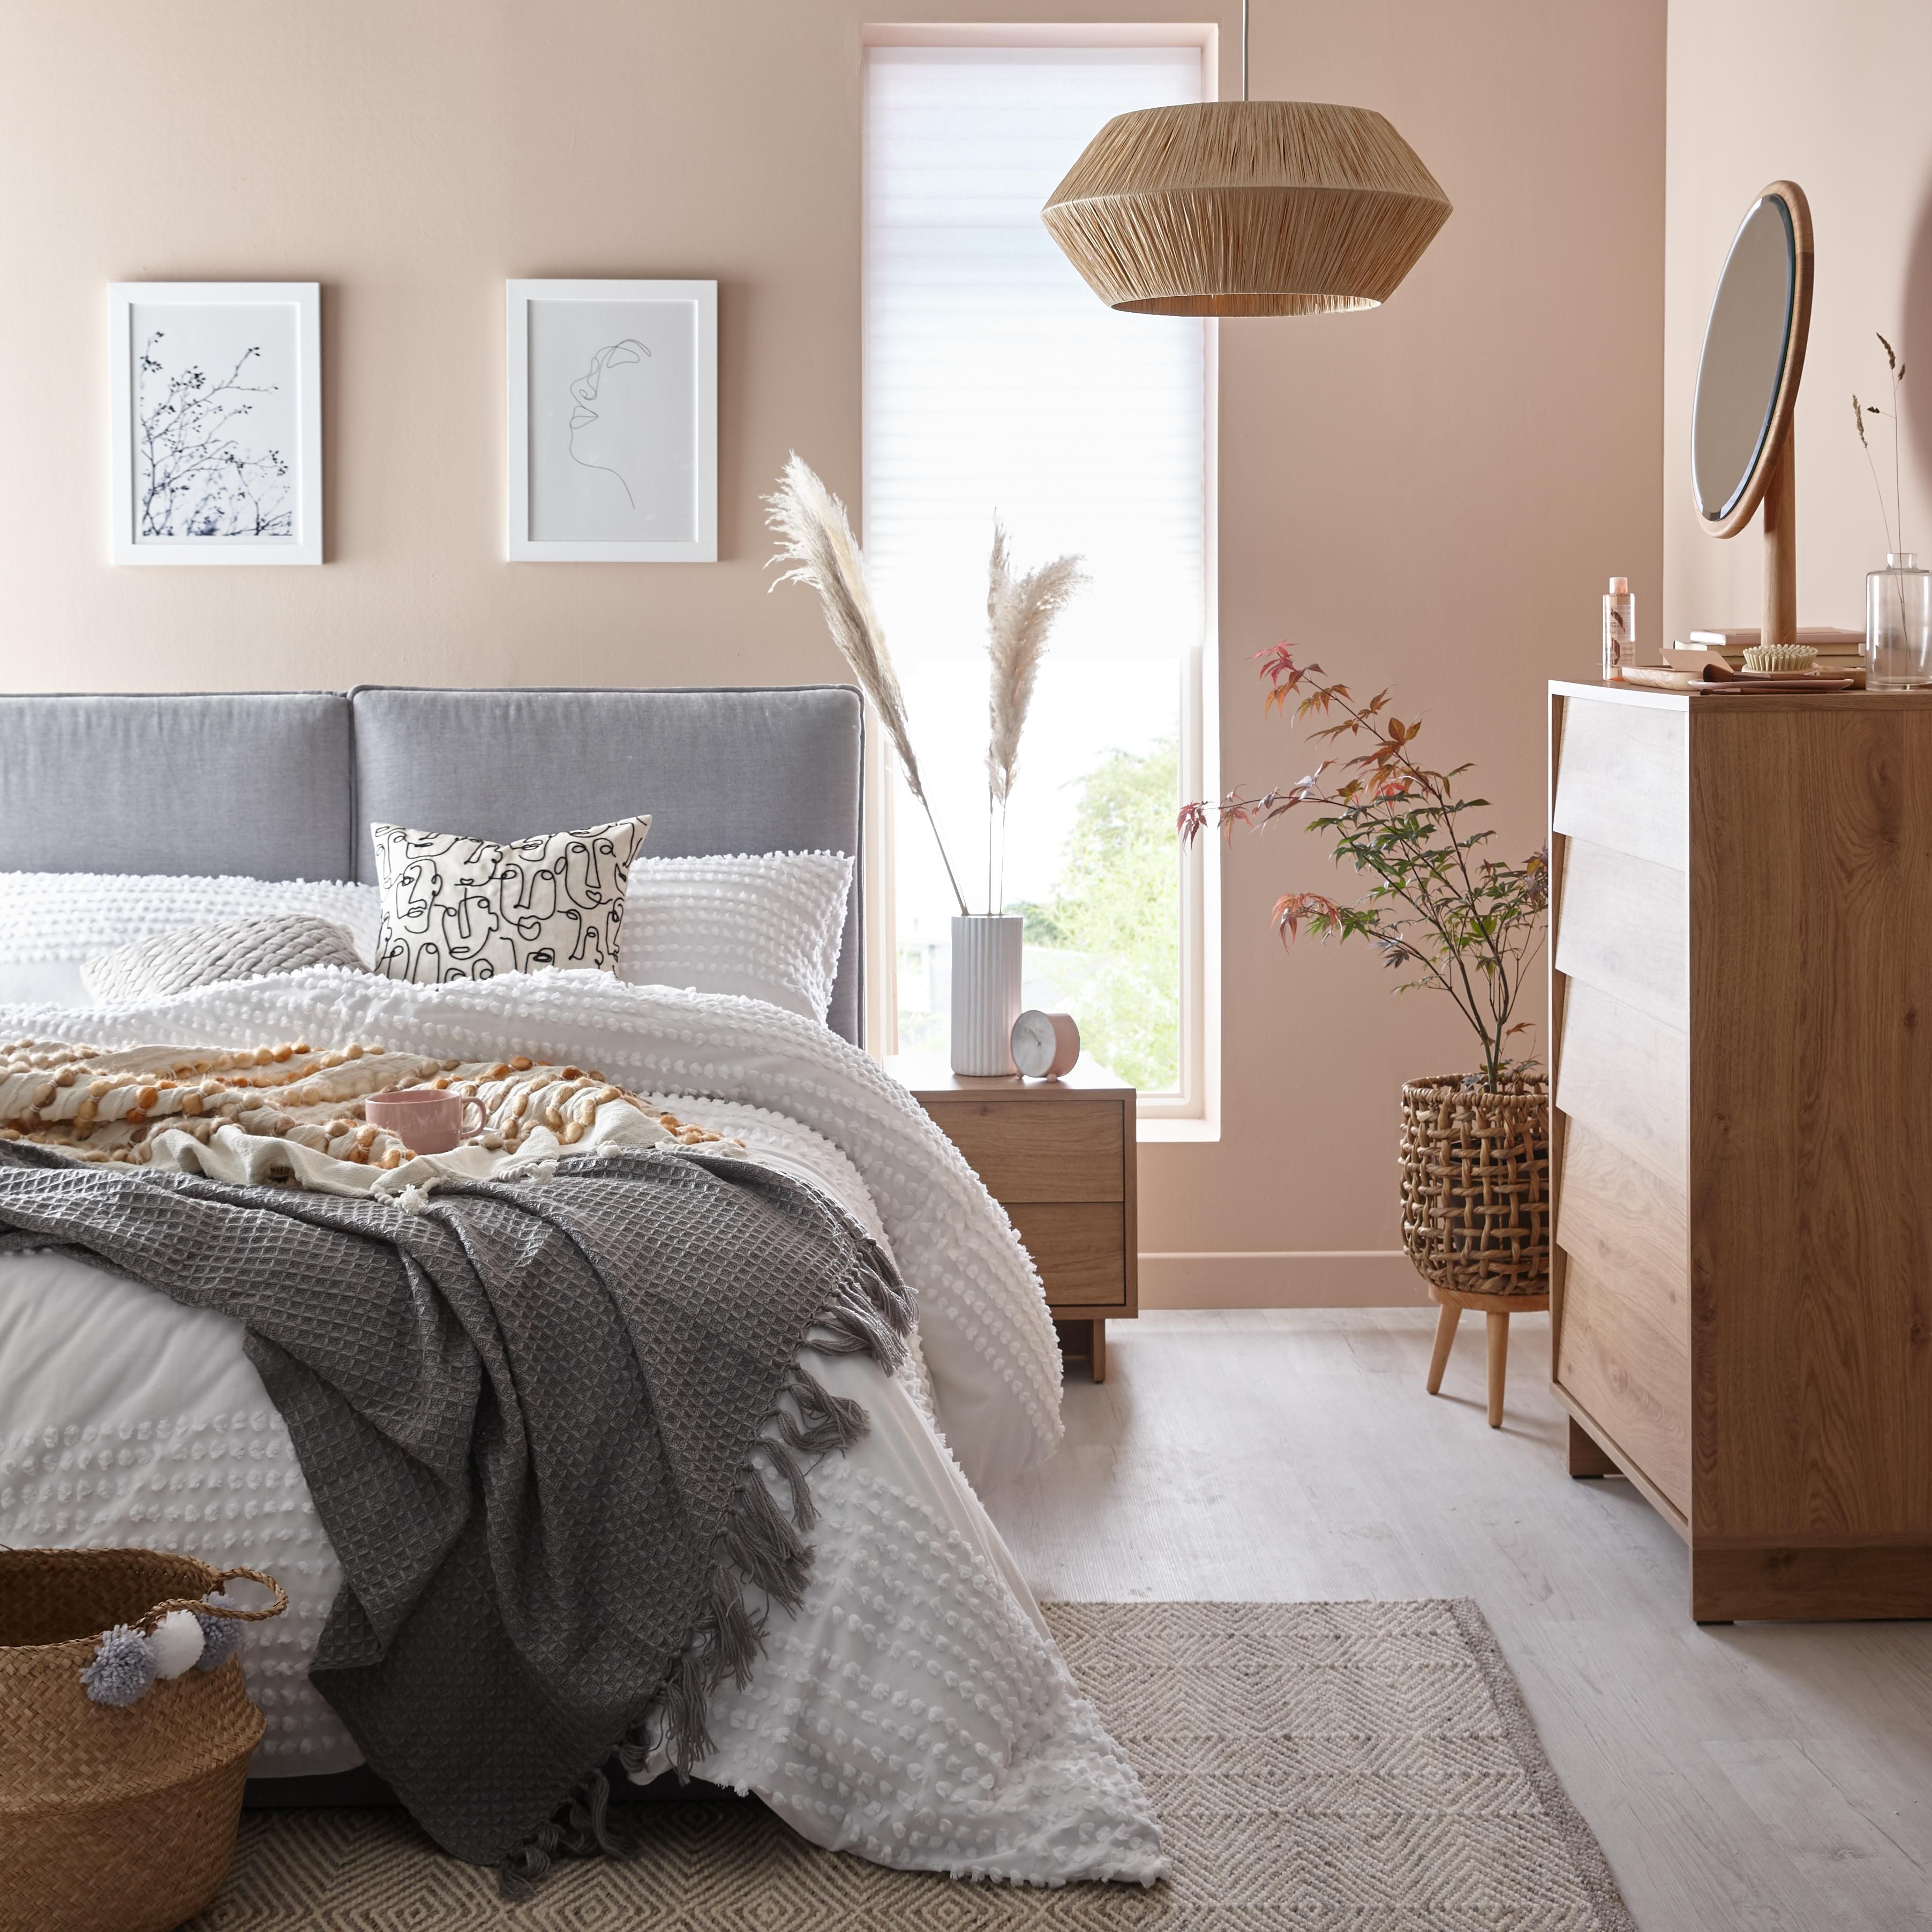 10 Bedroom Makeover Ideas: Transform Your Room Decor Even On A Budget